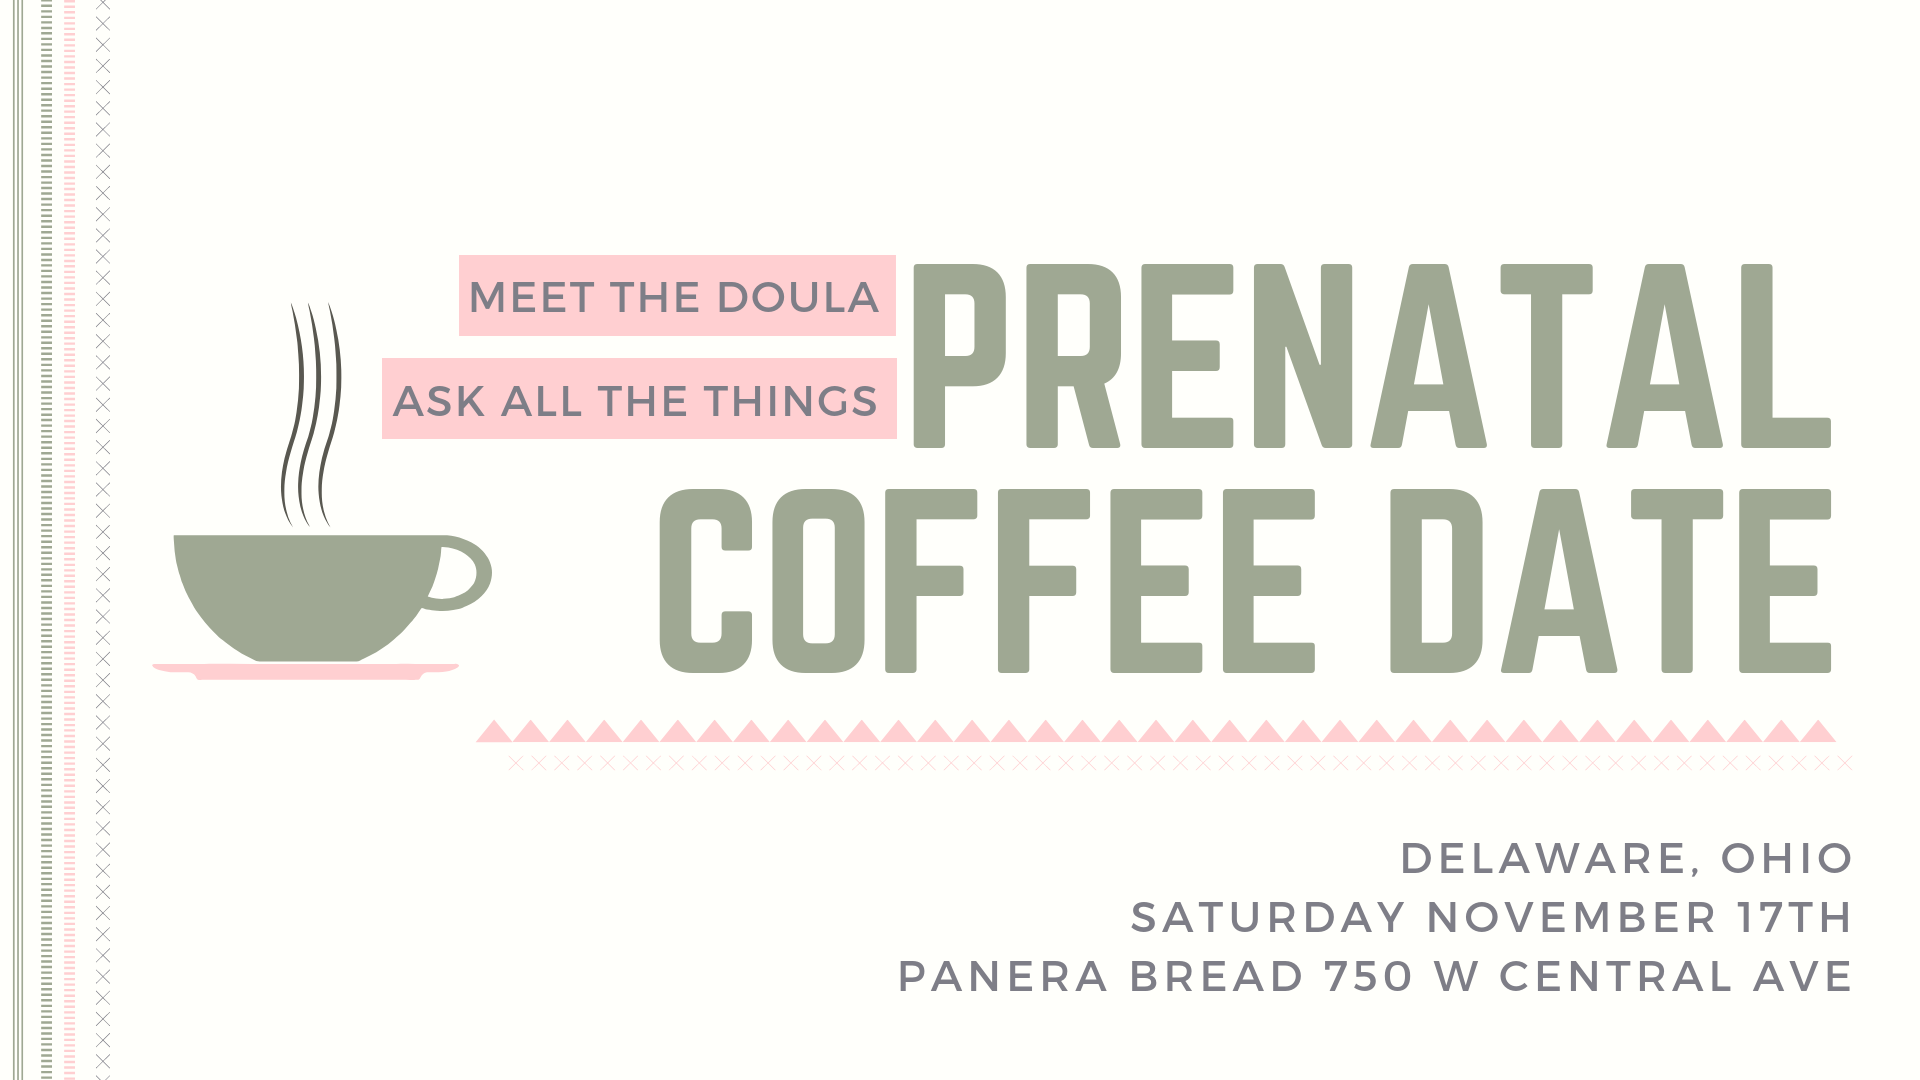 Meet the doula Prenatal Support Coffee Date